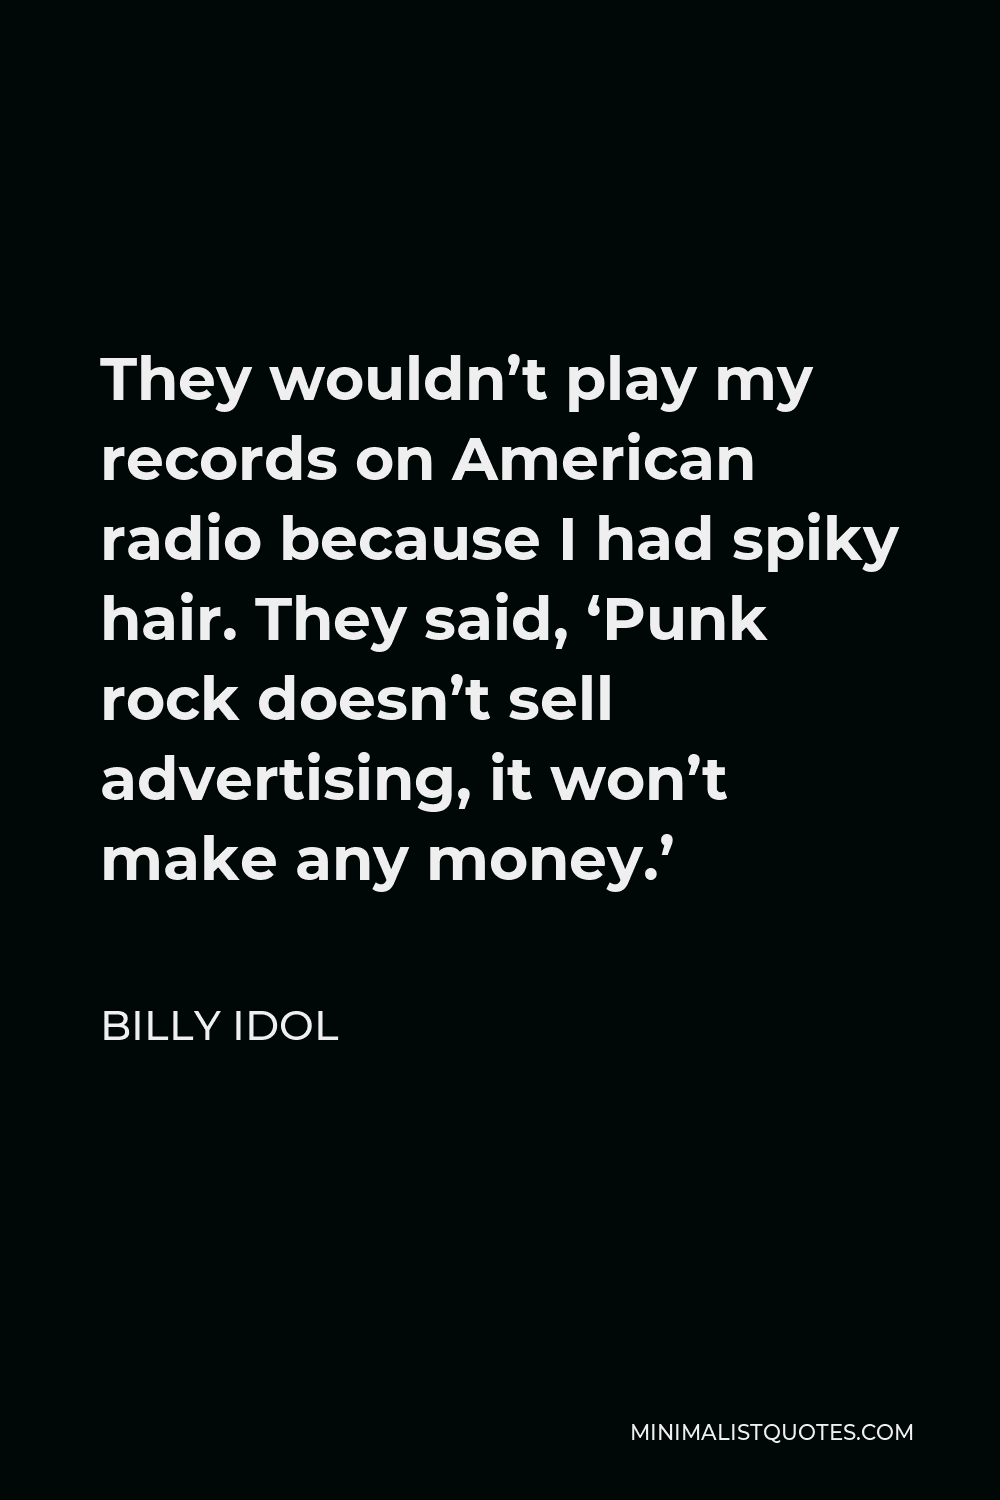 Billy Idol Quote - They wouldn’t play my records on American radio because I had spiky hair. They said, ‘Punk rock doesn’t sell advertising, it won’t make any money.’